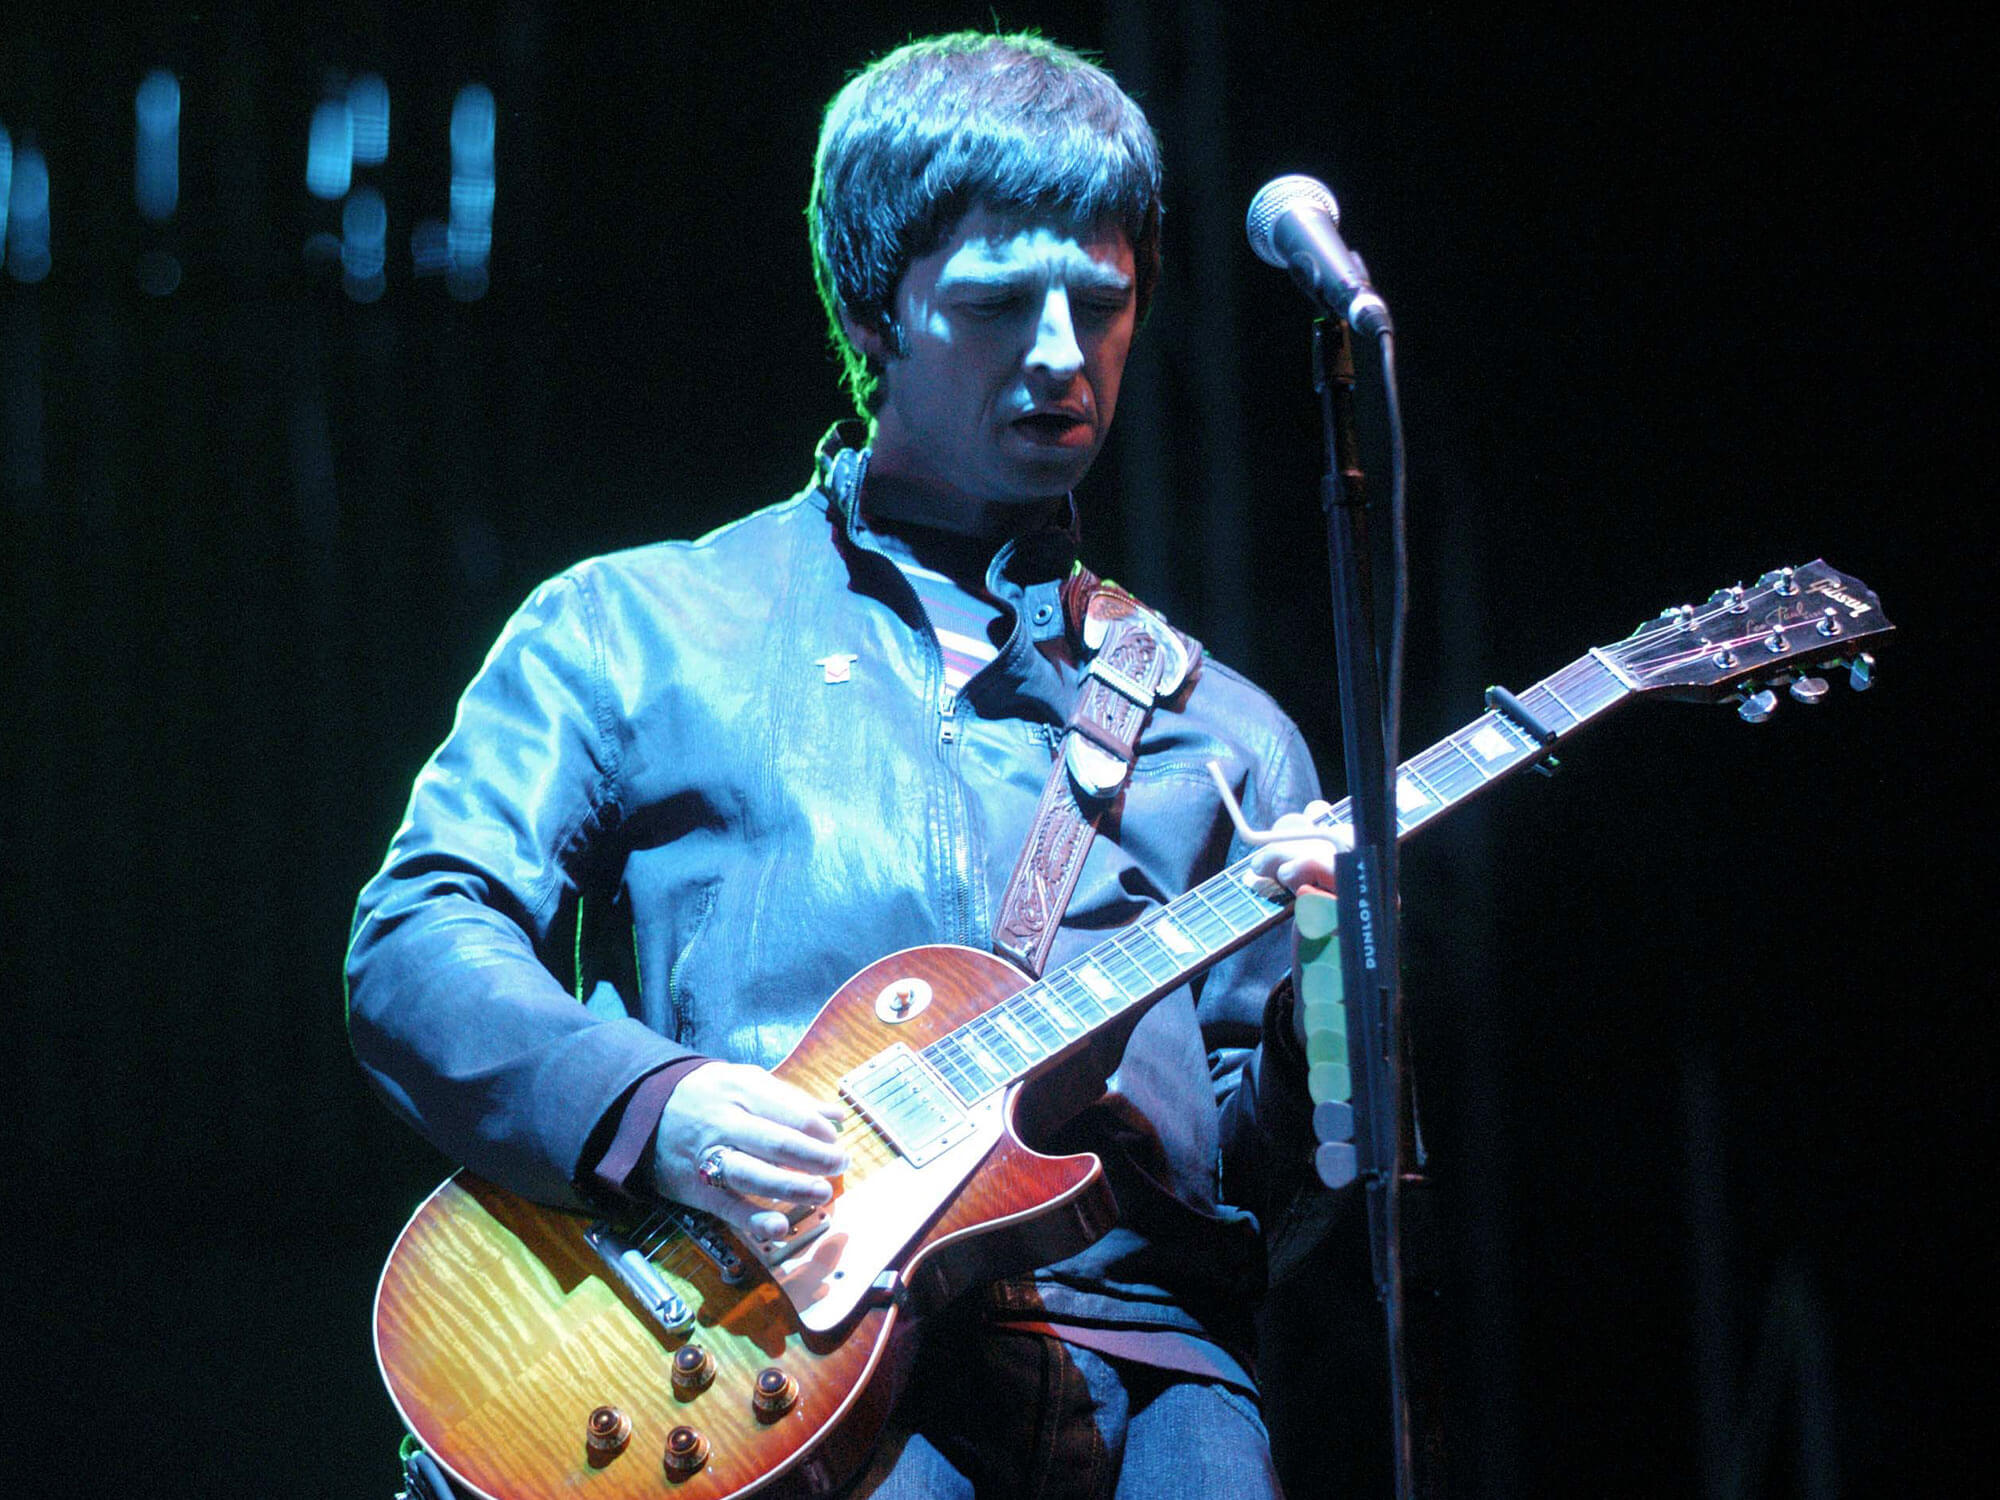 Noel Gallagher performing live with a Gibson Les Paul